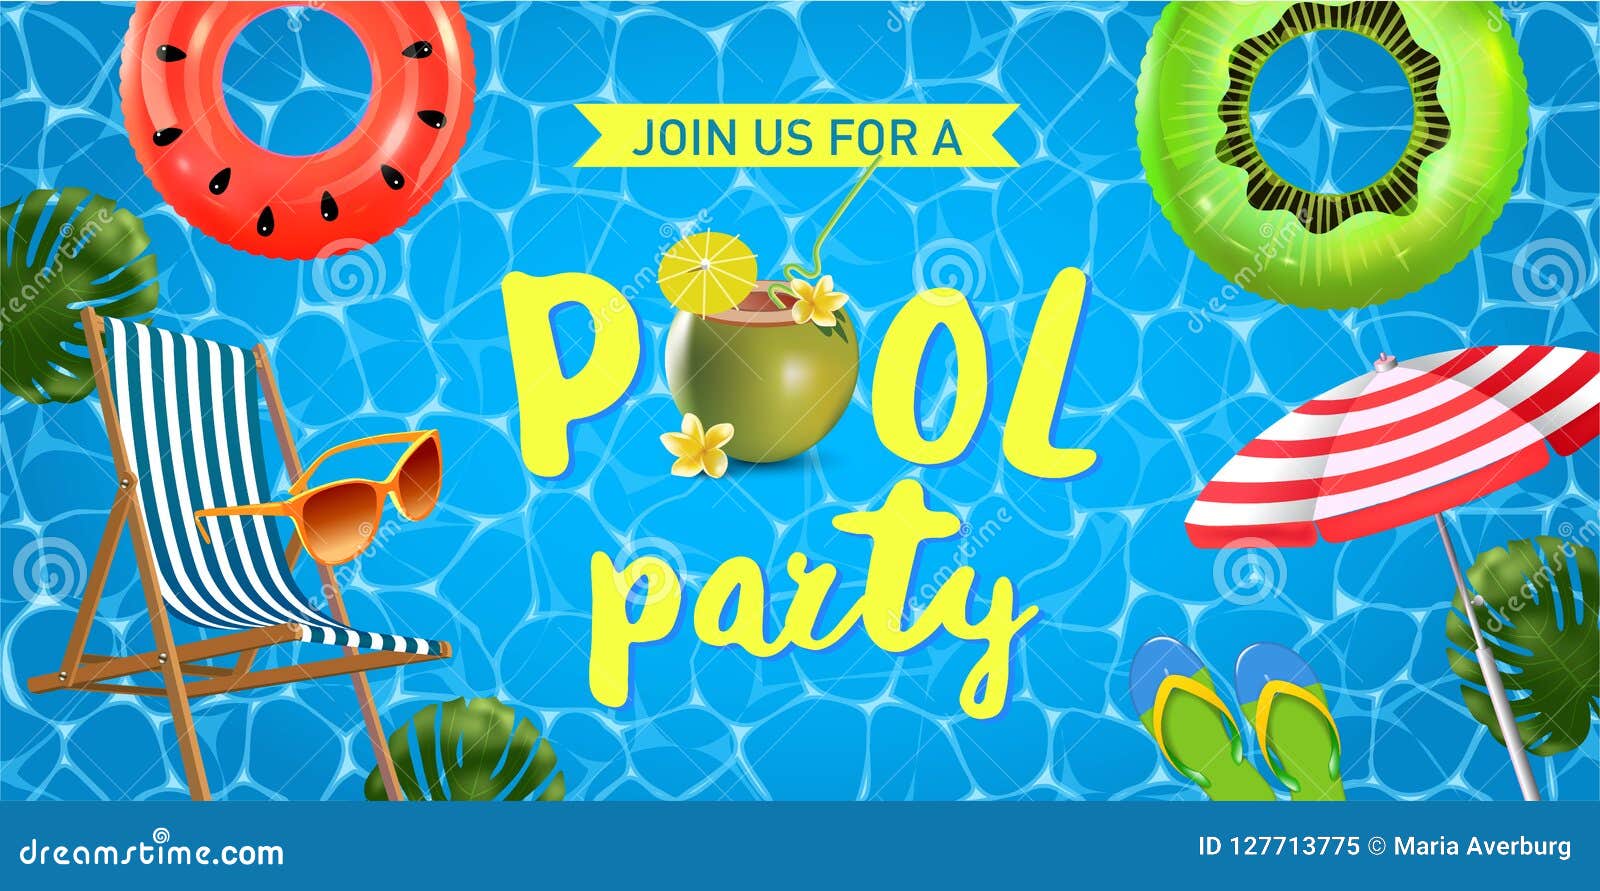 Pool Party Invitation Vector Illustration. Top View Of Swimming Pool ...